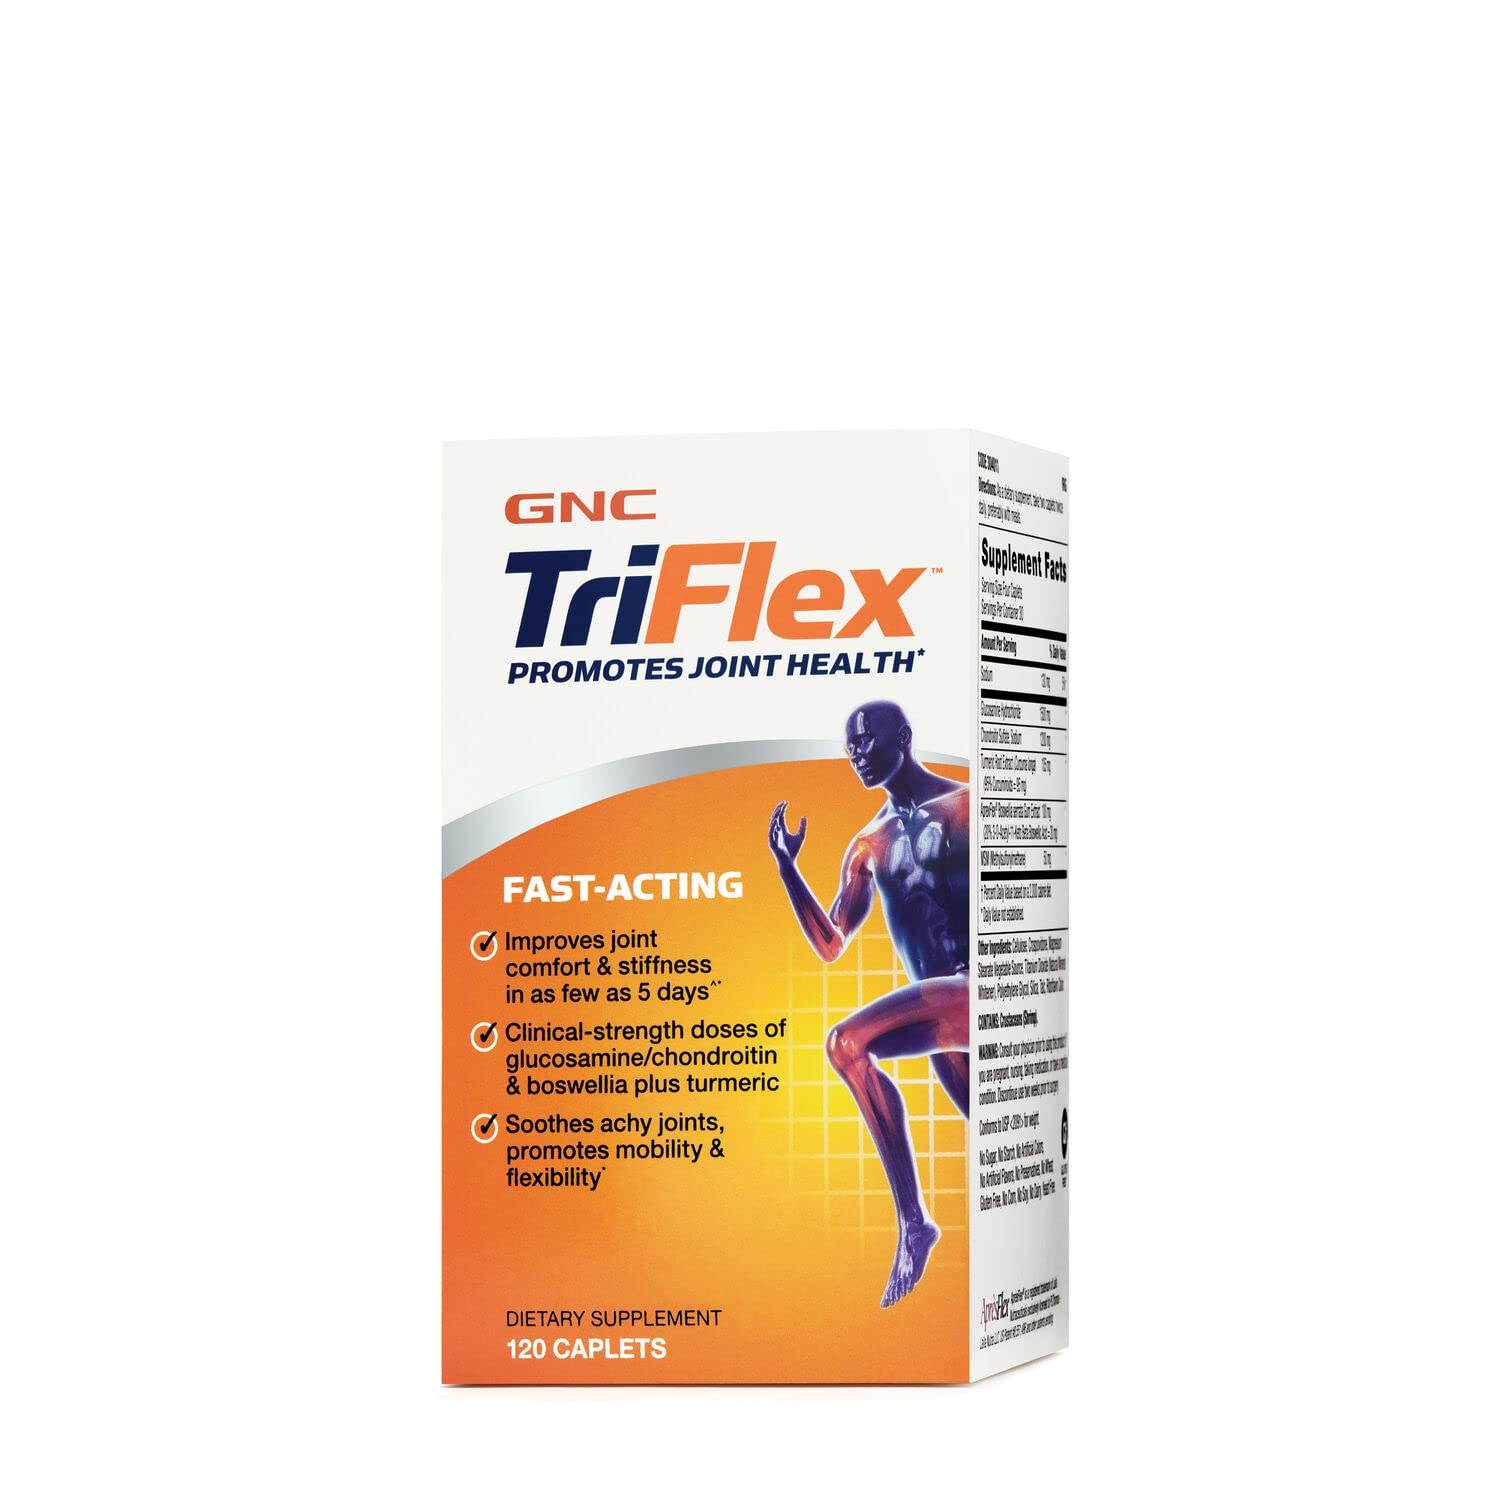 GNC TriFlex Fast-Acting | Improves Joint Comfort and Stiffness, Clinical Strength Doses of Glucosami